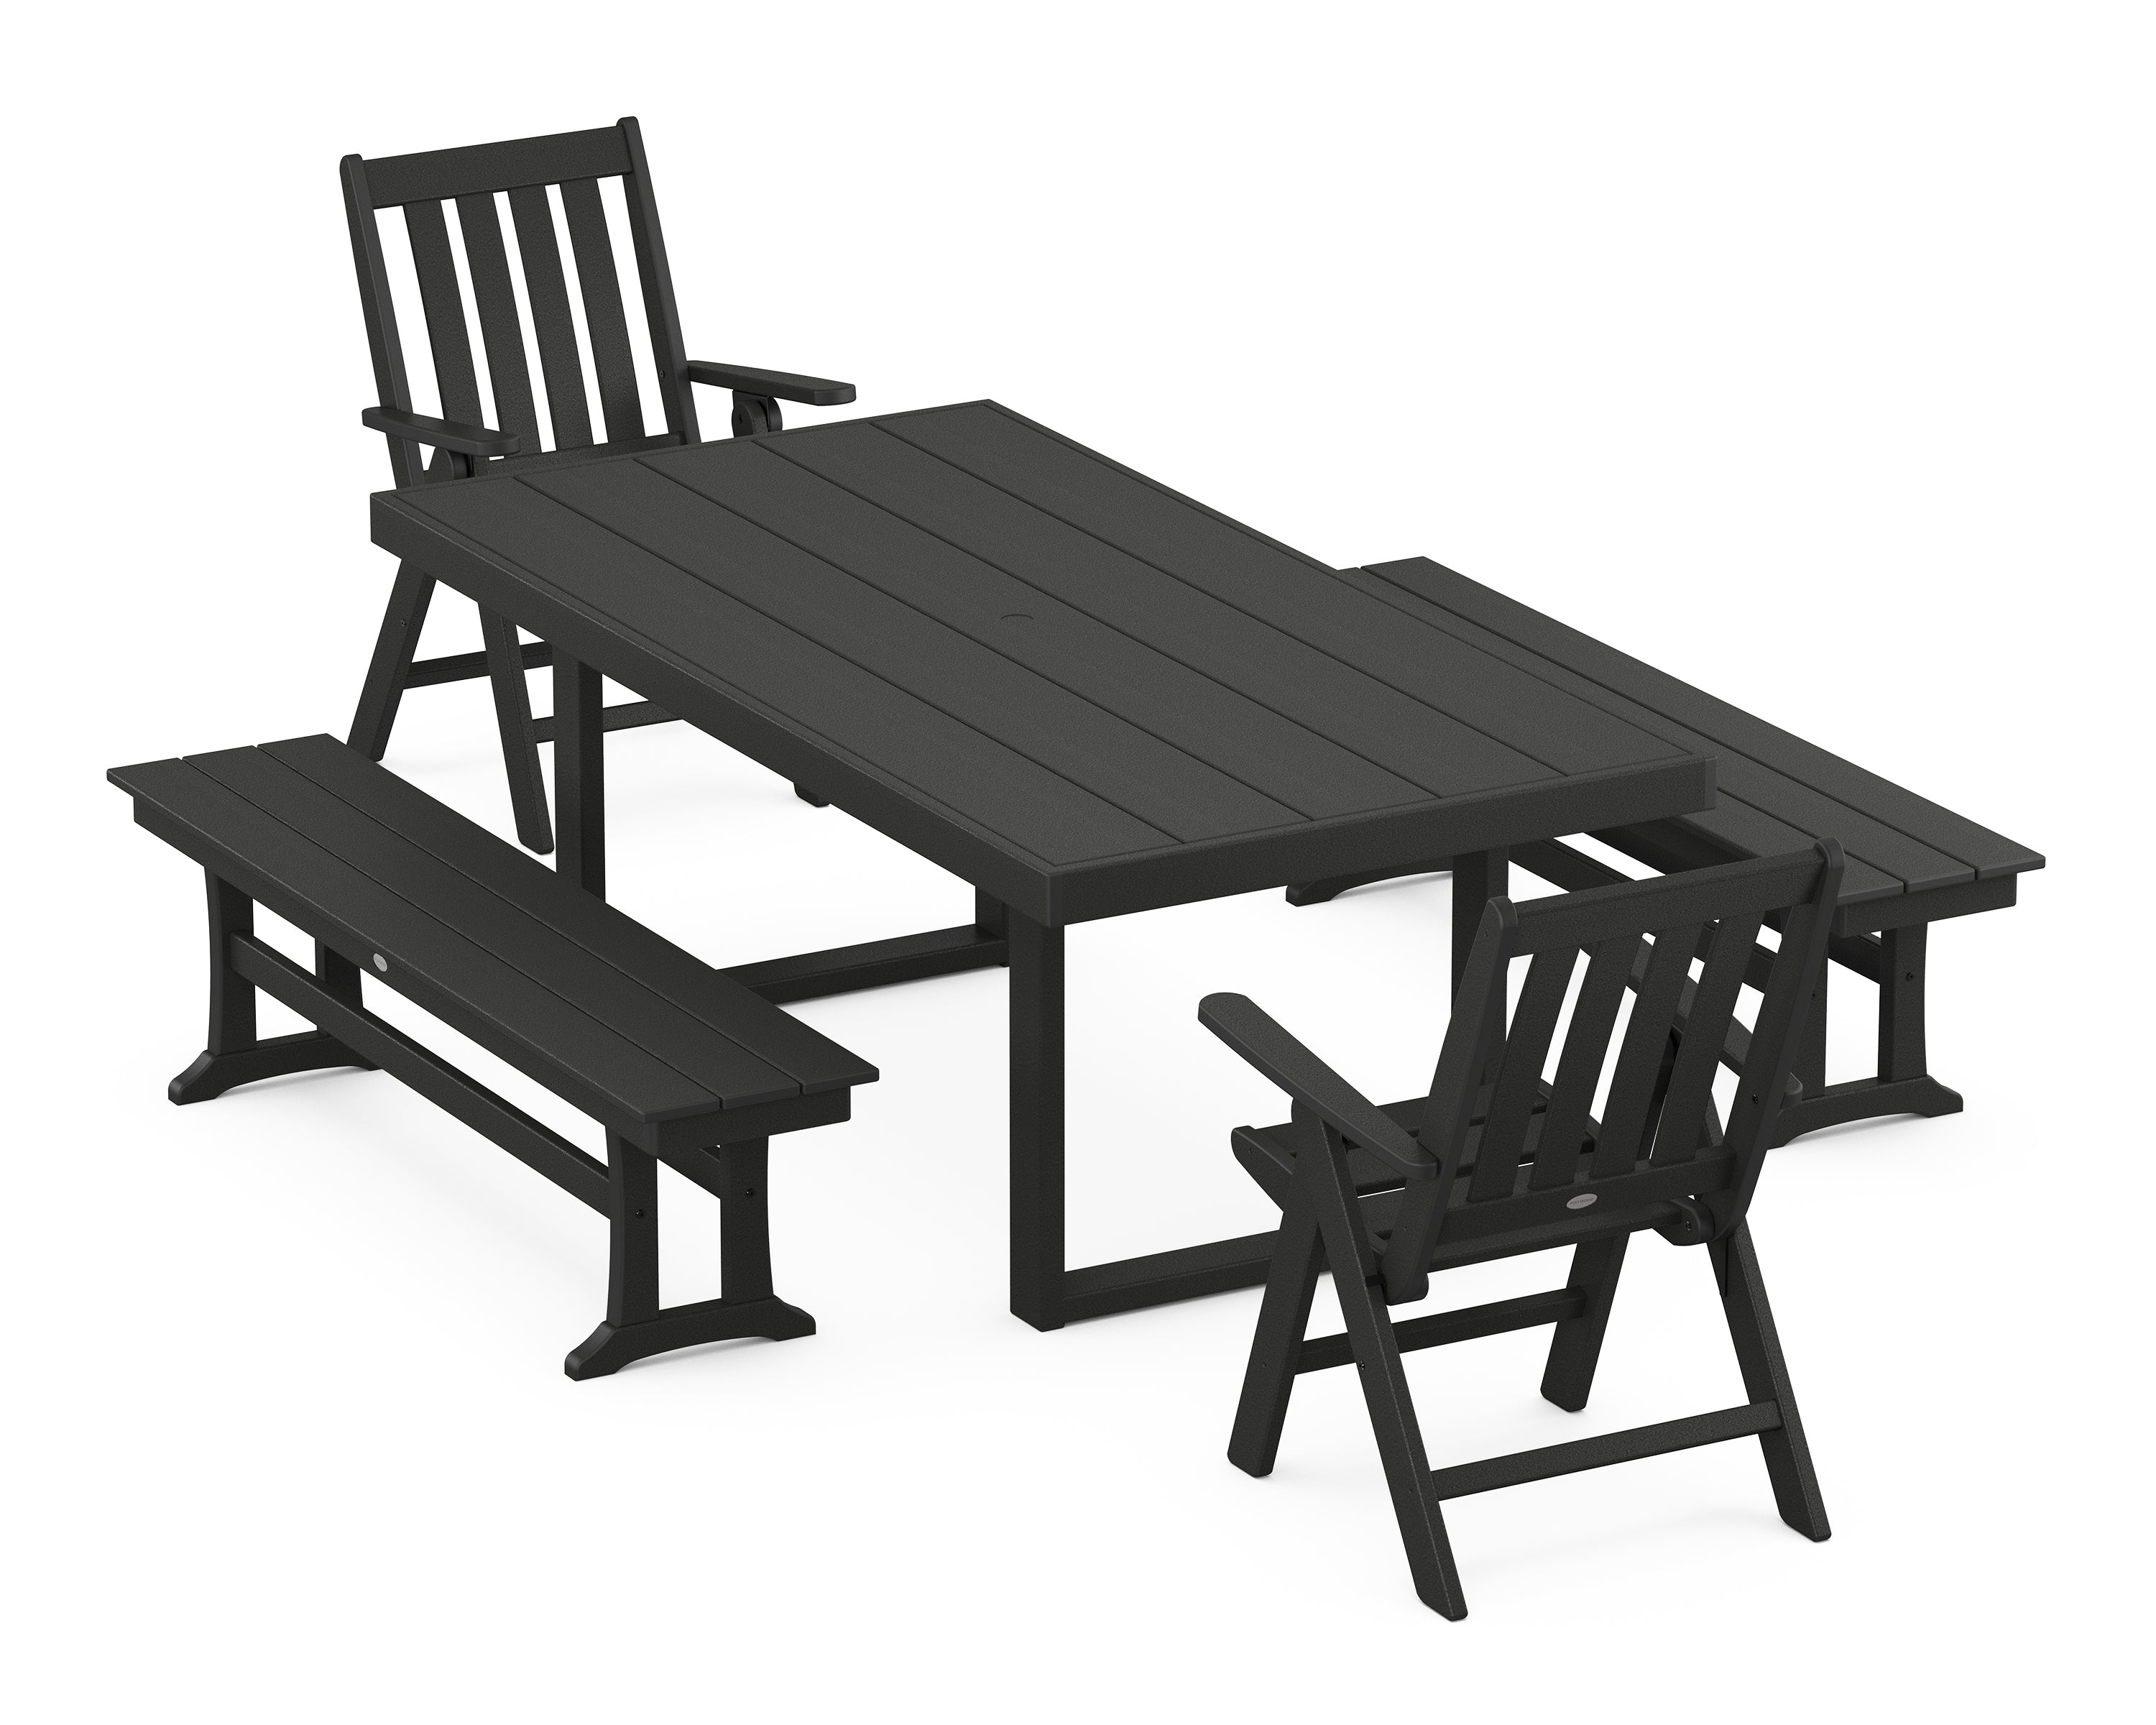 POLYWOOD® Vineyard Folding Chair 5-Piece Dining Set with Benches in Black